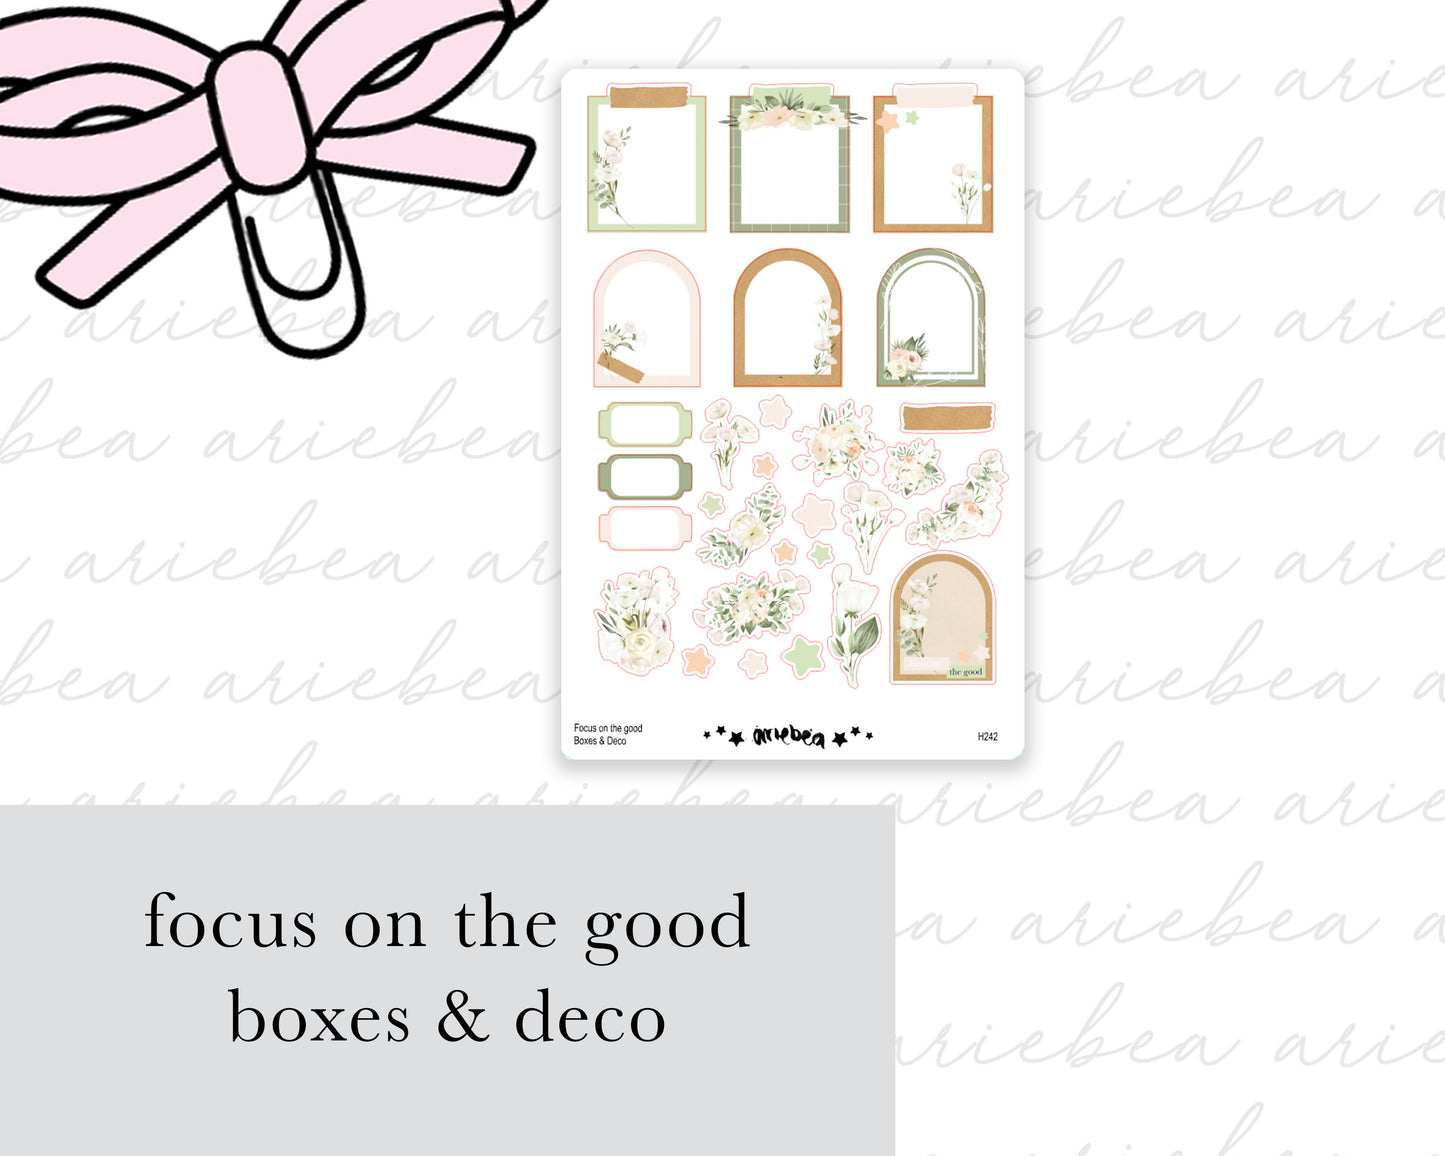 Focus On The Good Full Mini Kit (4 pages)